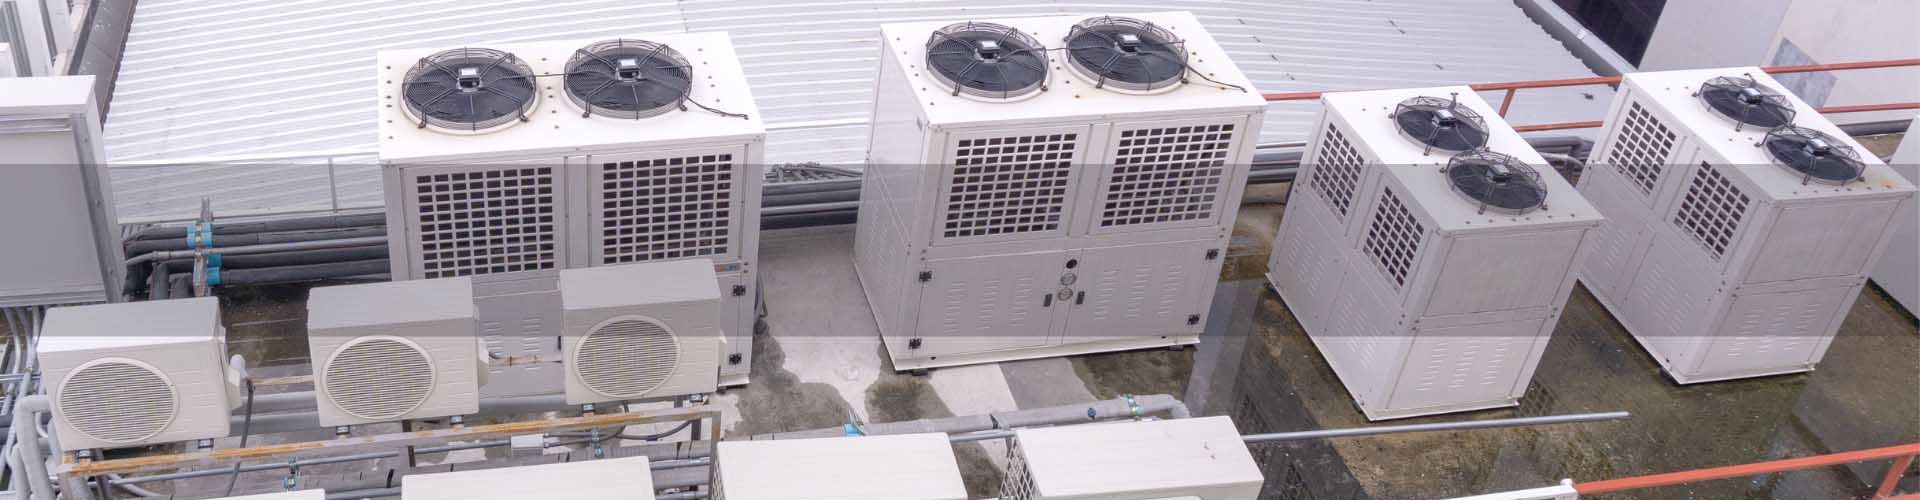 Air cooled saccroll chiller banner